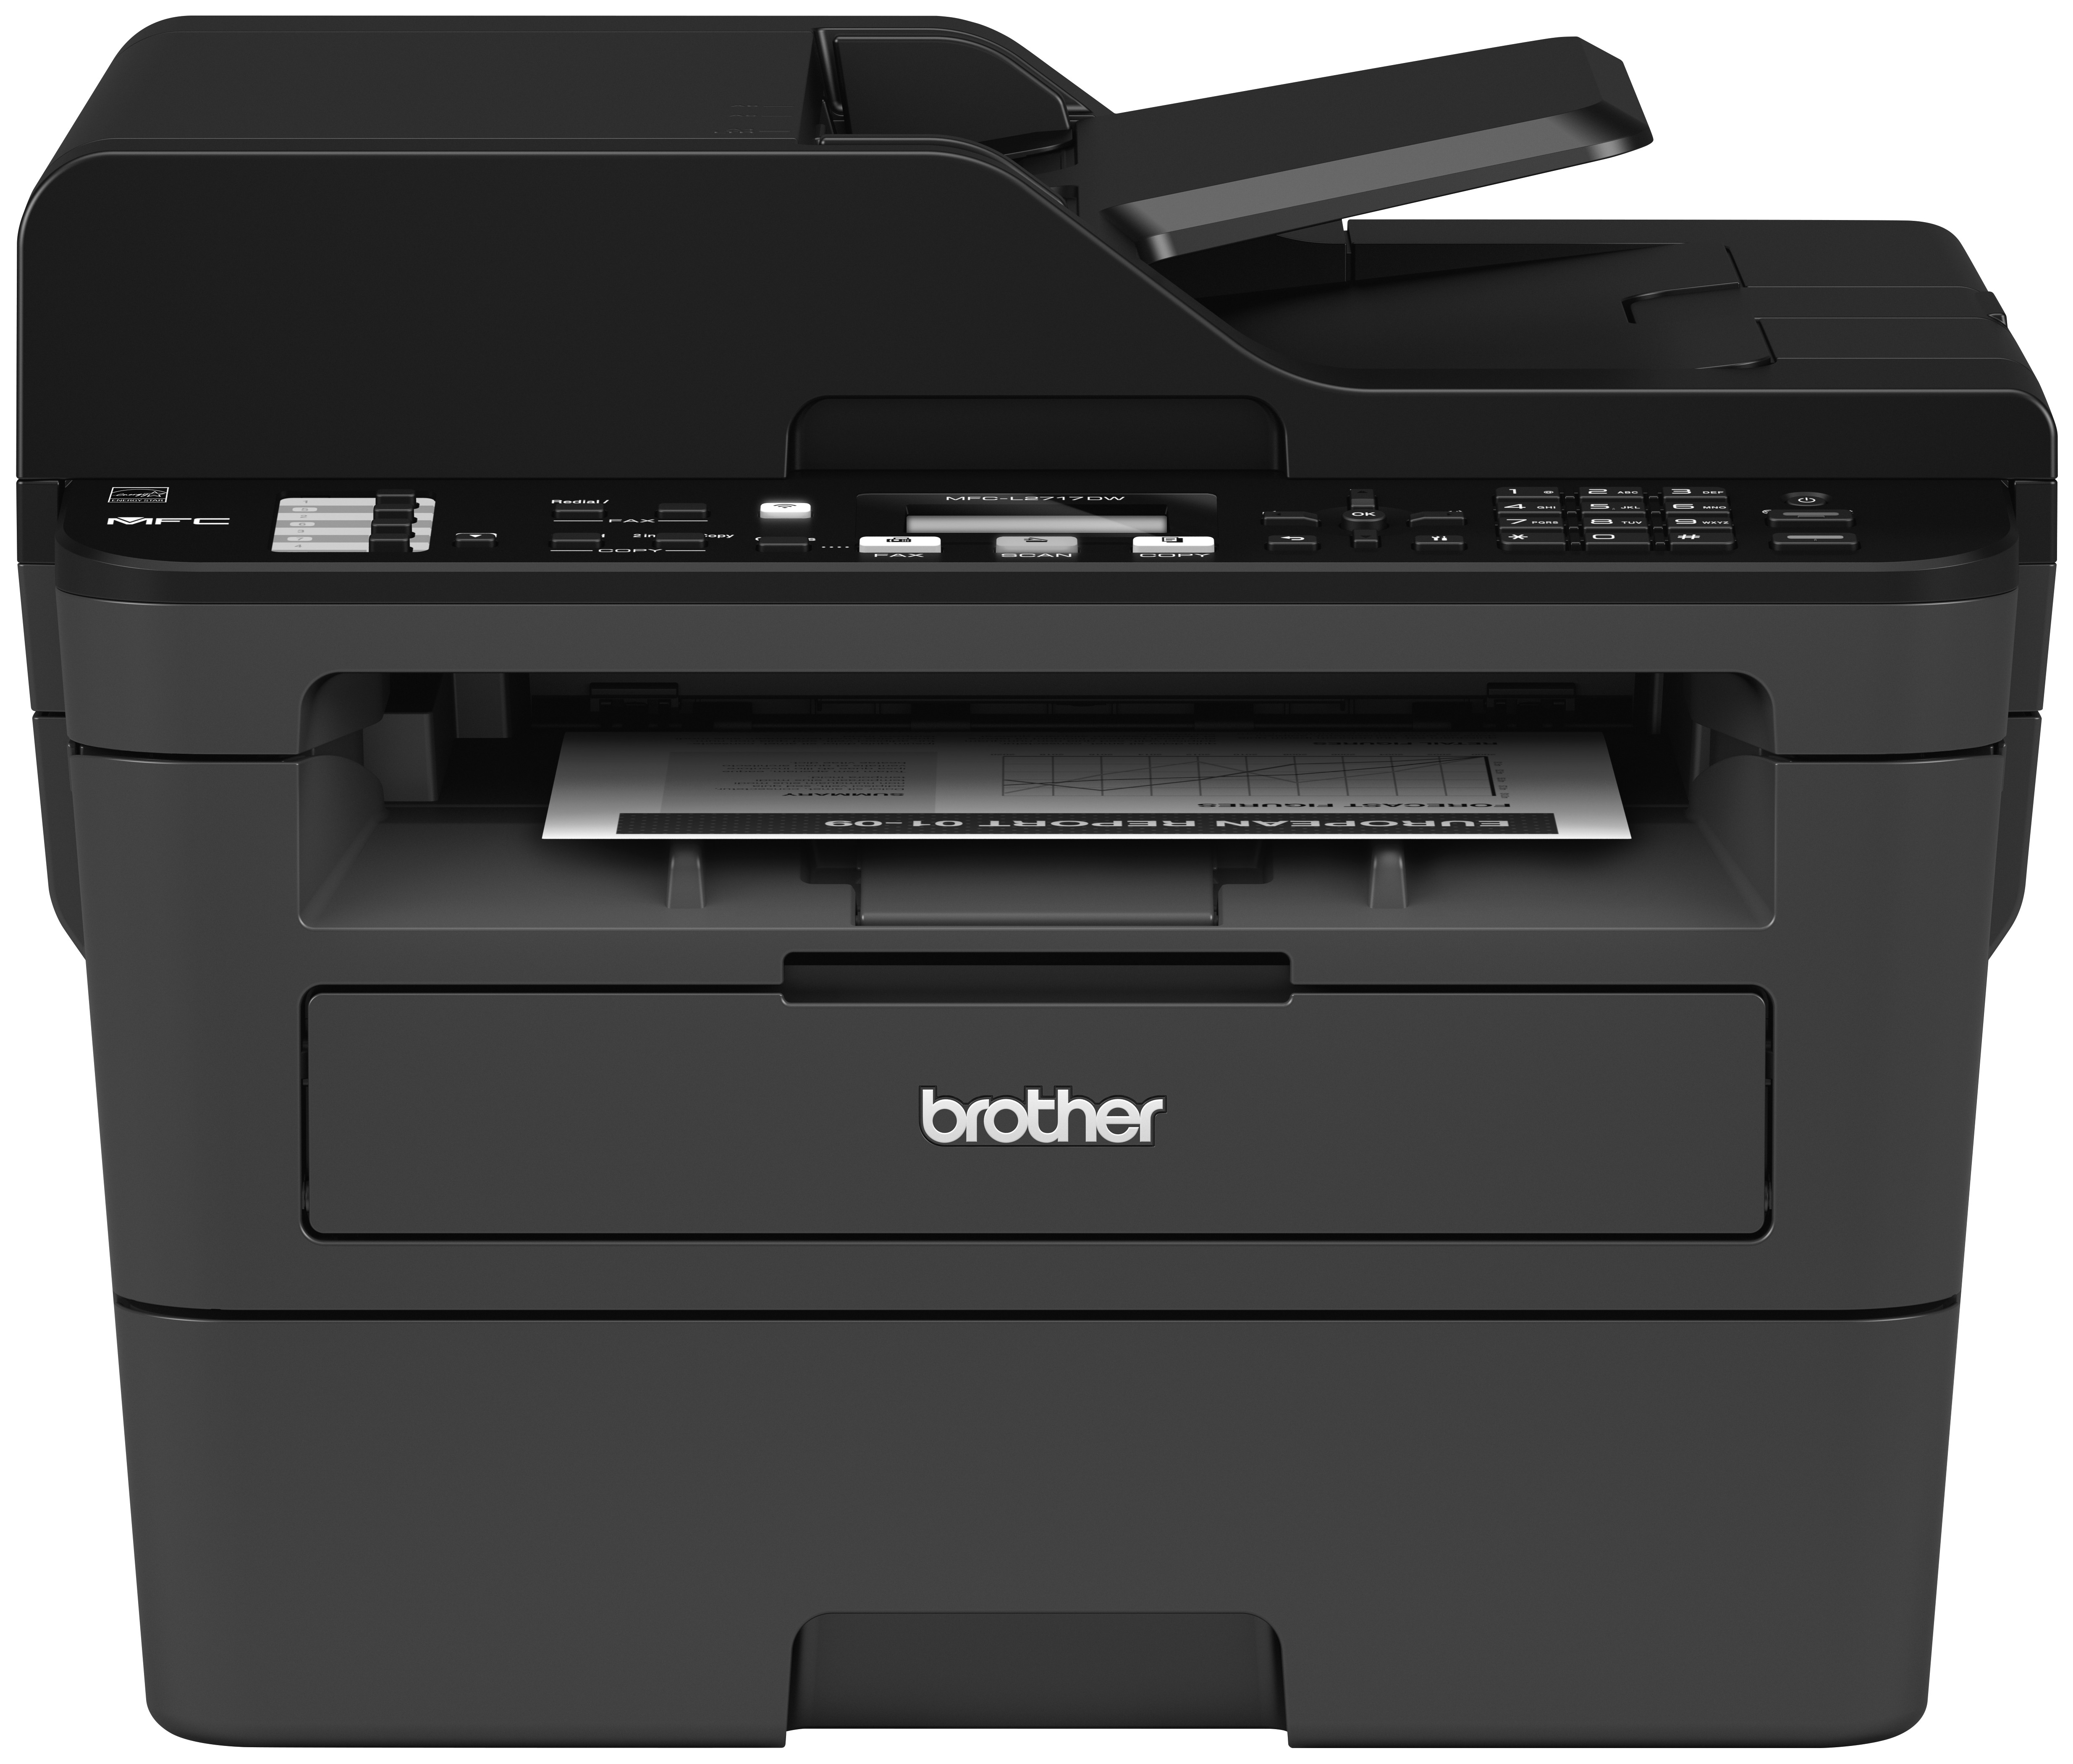 Restored Brother MFC-L2717DW Compact Laser All-in-One Printer, Wireless Connectivity and Duplex Printing (Refurbished) - image 1 of 9